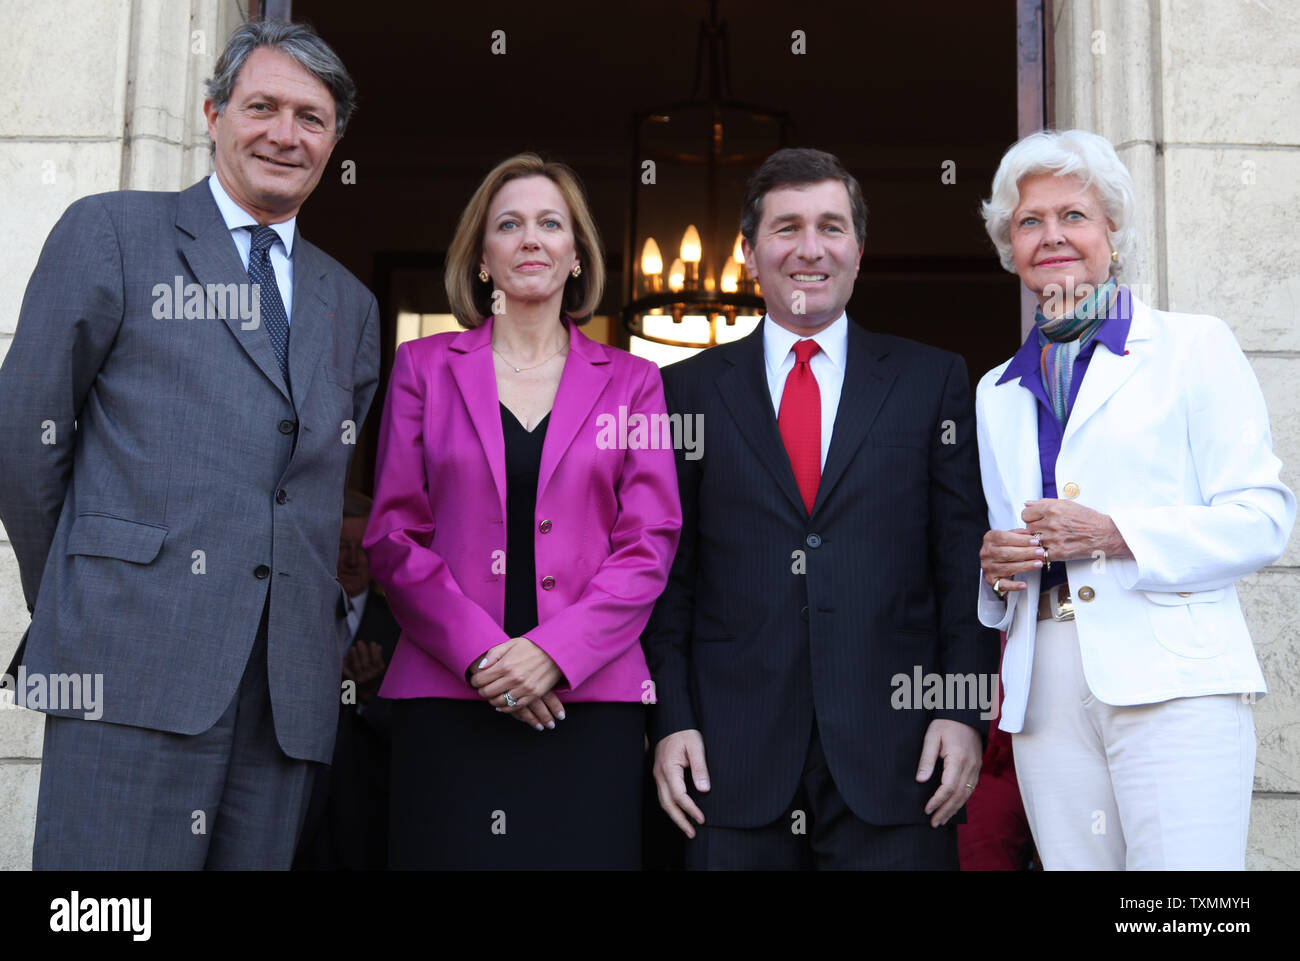 (From R to L) Former Deauville Mayor Anne d'Ornano, U.S. Ambassador to France Charles H. Rivkin, Rivkin's wife Susan and Deauville Mayor Philippe Augier arrive at a reception held in Rivkin's honor at the City Hall of Deauville, France on September 5, 2009.  Rivkin is in Deauville to participate in the 35th American Film Festival of Deauville.     UPI/David Silpa Stock Photo